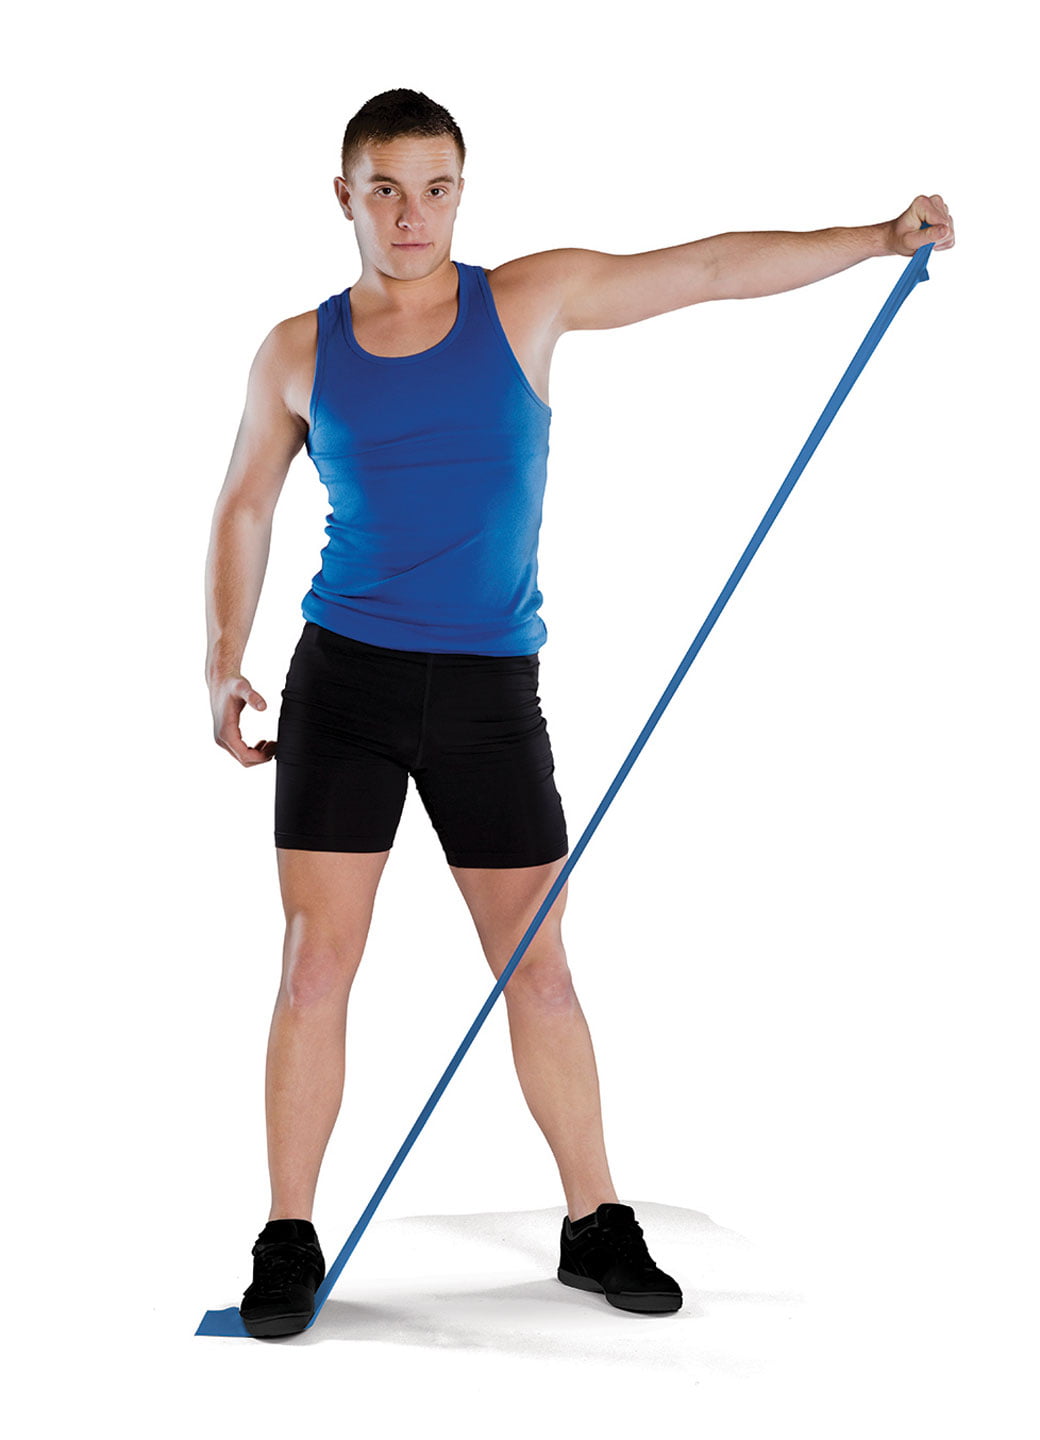 12-Inch Details about   RBX Bungee Lateral Resistance Band 